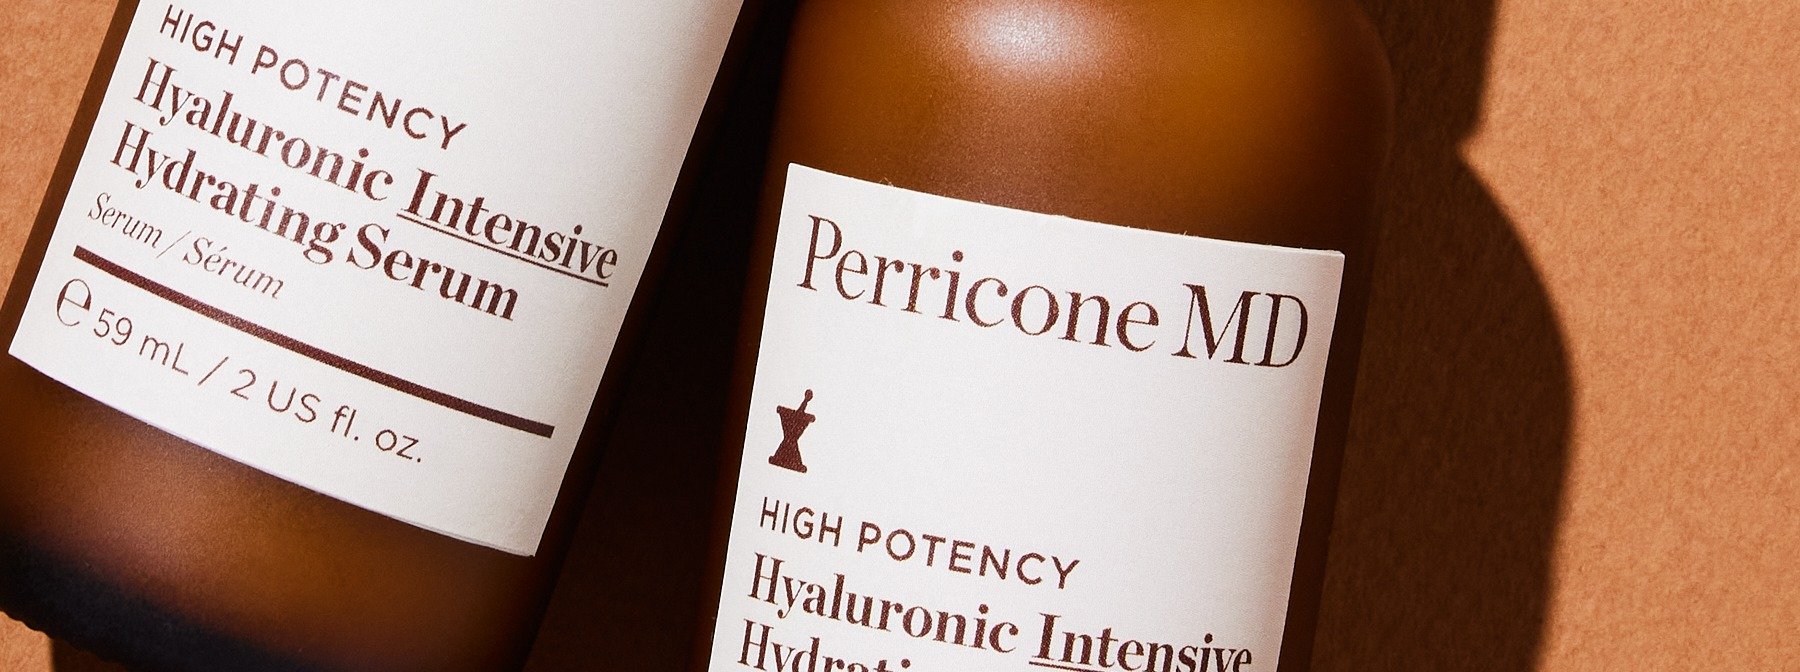 Ingredient Spotlight: The Benefits of Hyaluronic Acid for the Skin